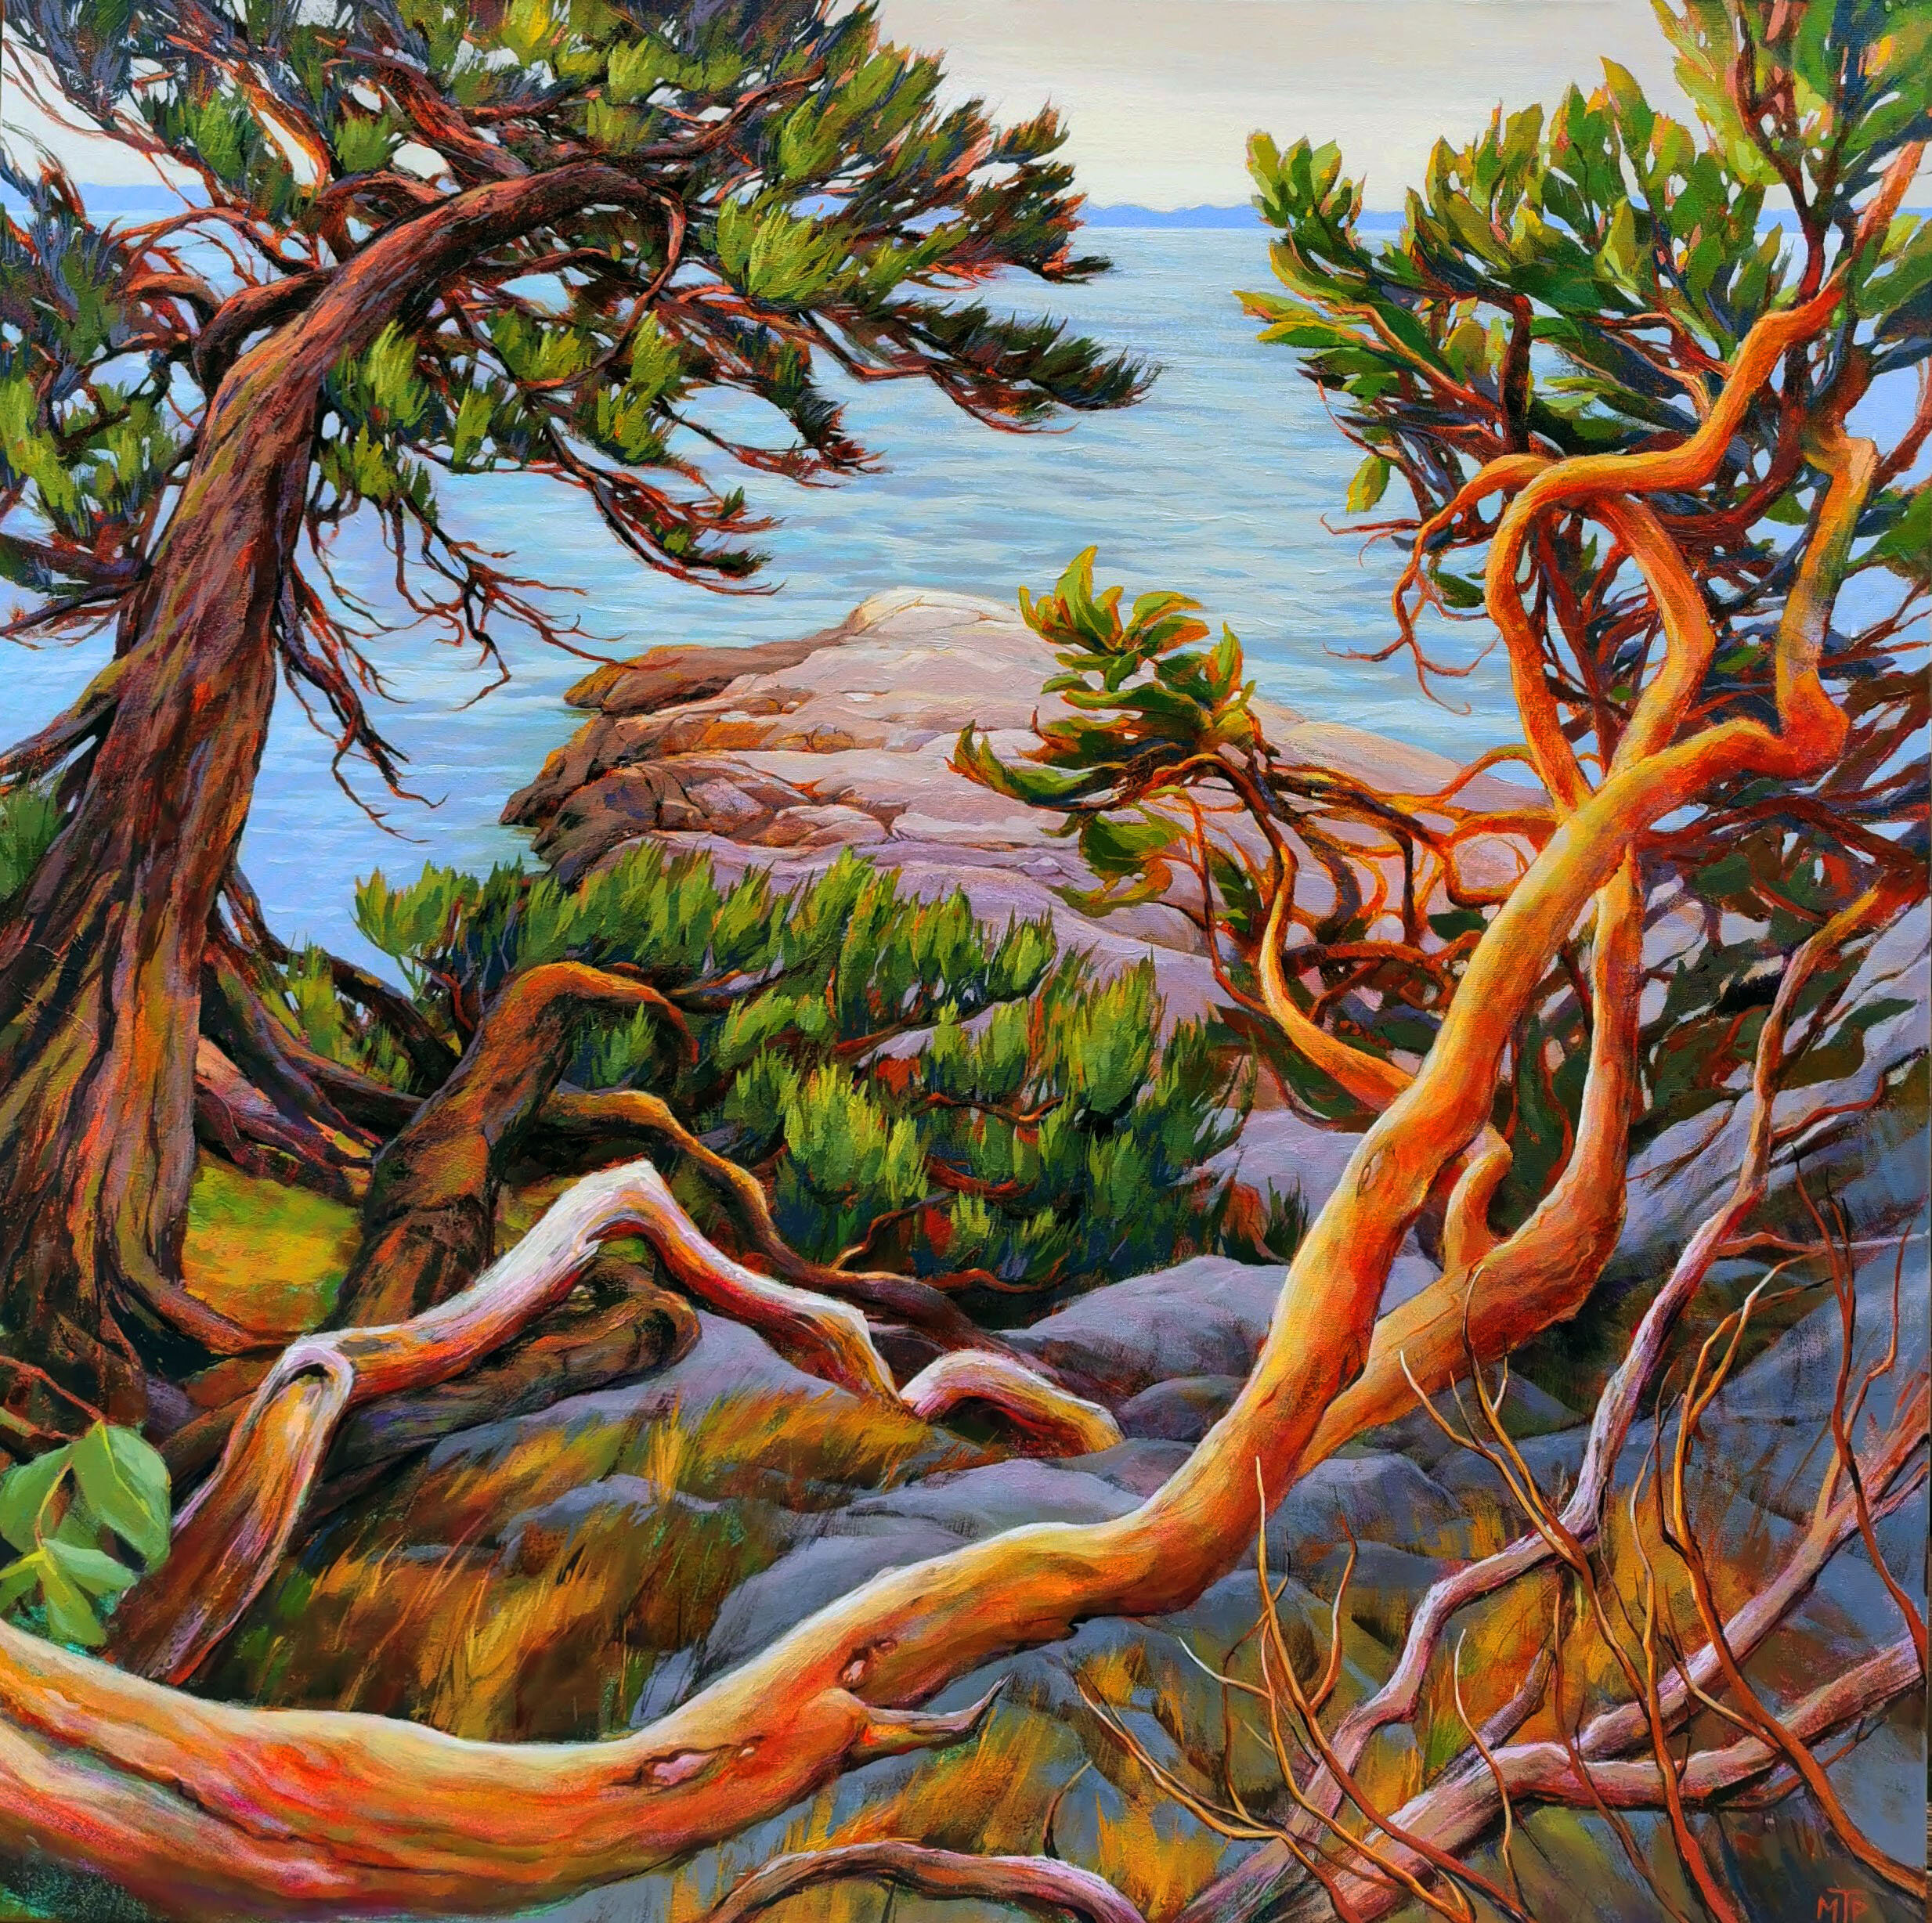  Coastal Arbutus and Jack Pine   Acrylic on canvas, 48x48 inches, Sold  